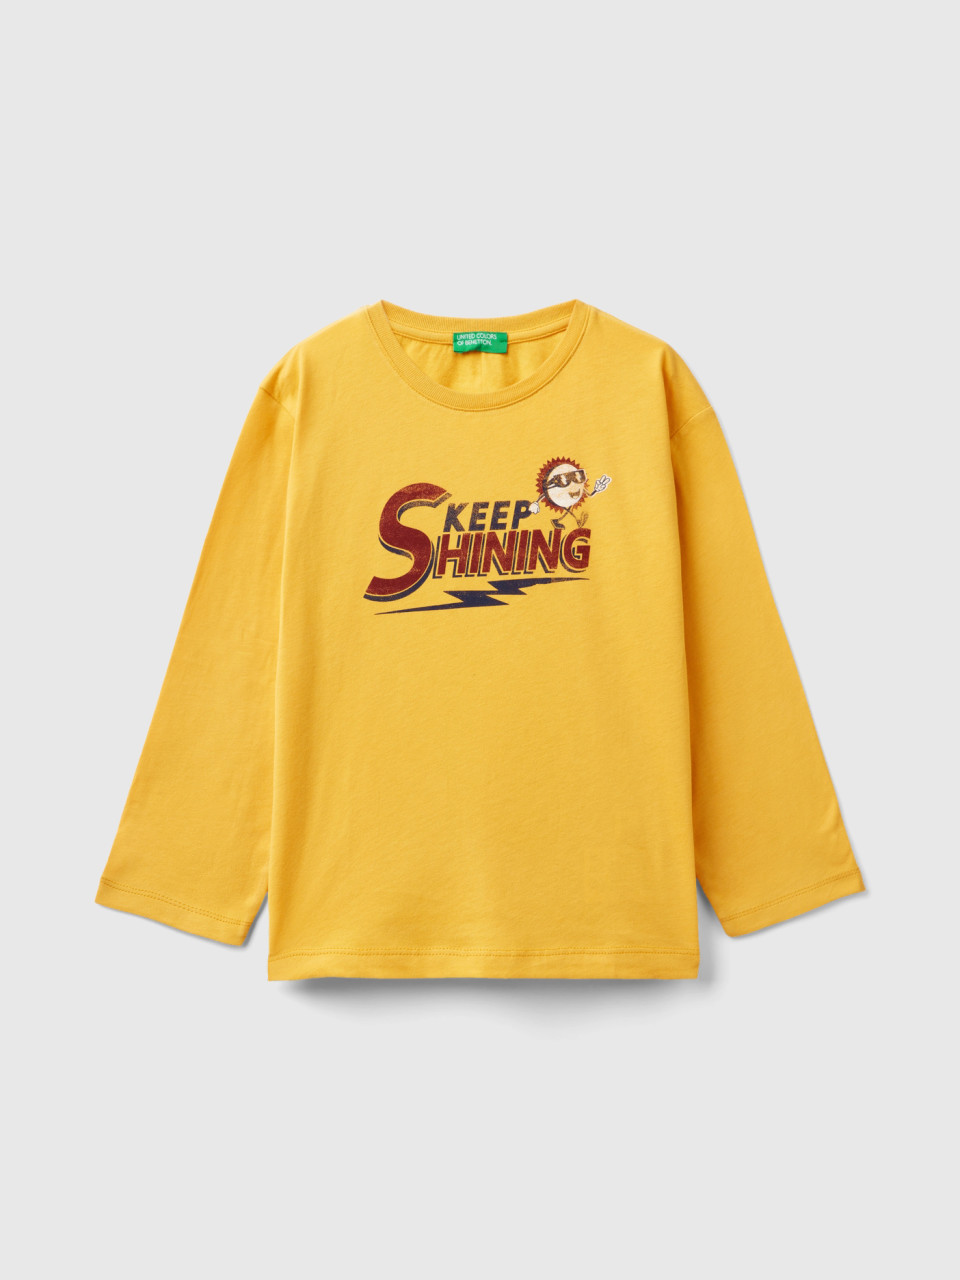 Benetton, Oversized Fit T-shirt With Allover Print, Yellow, Kids